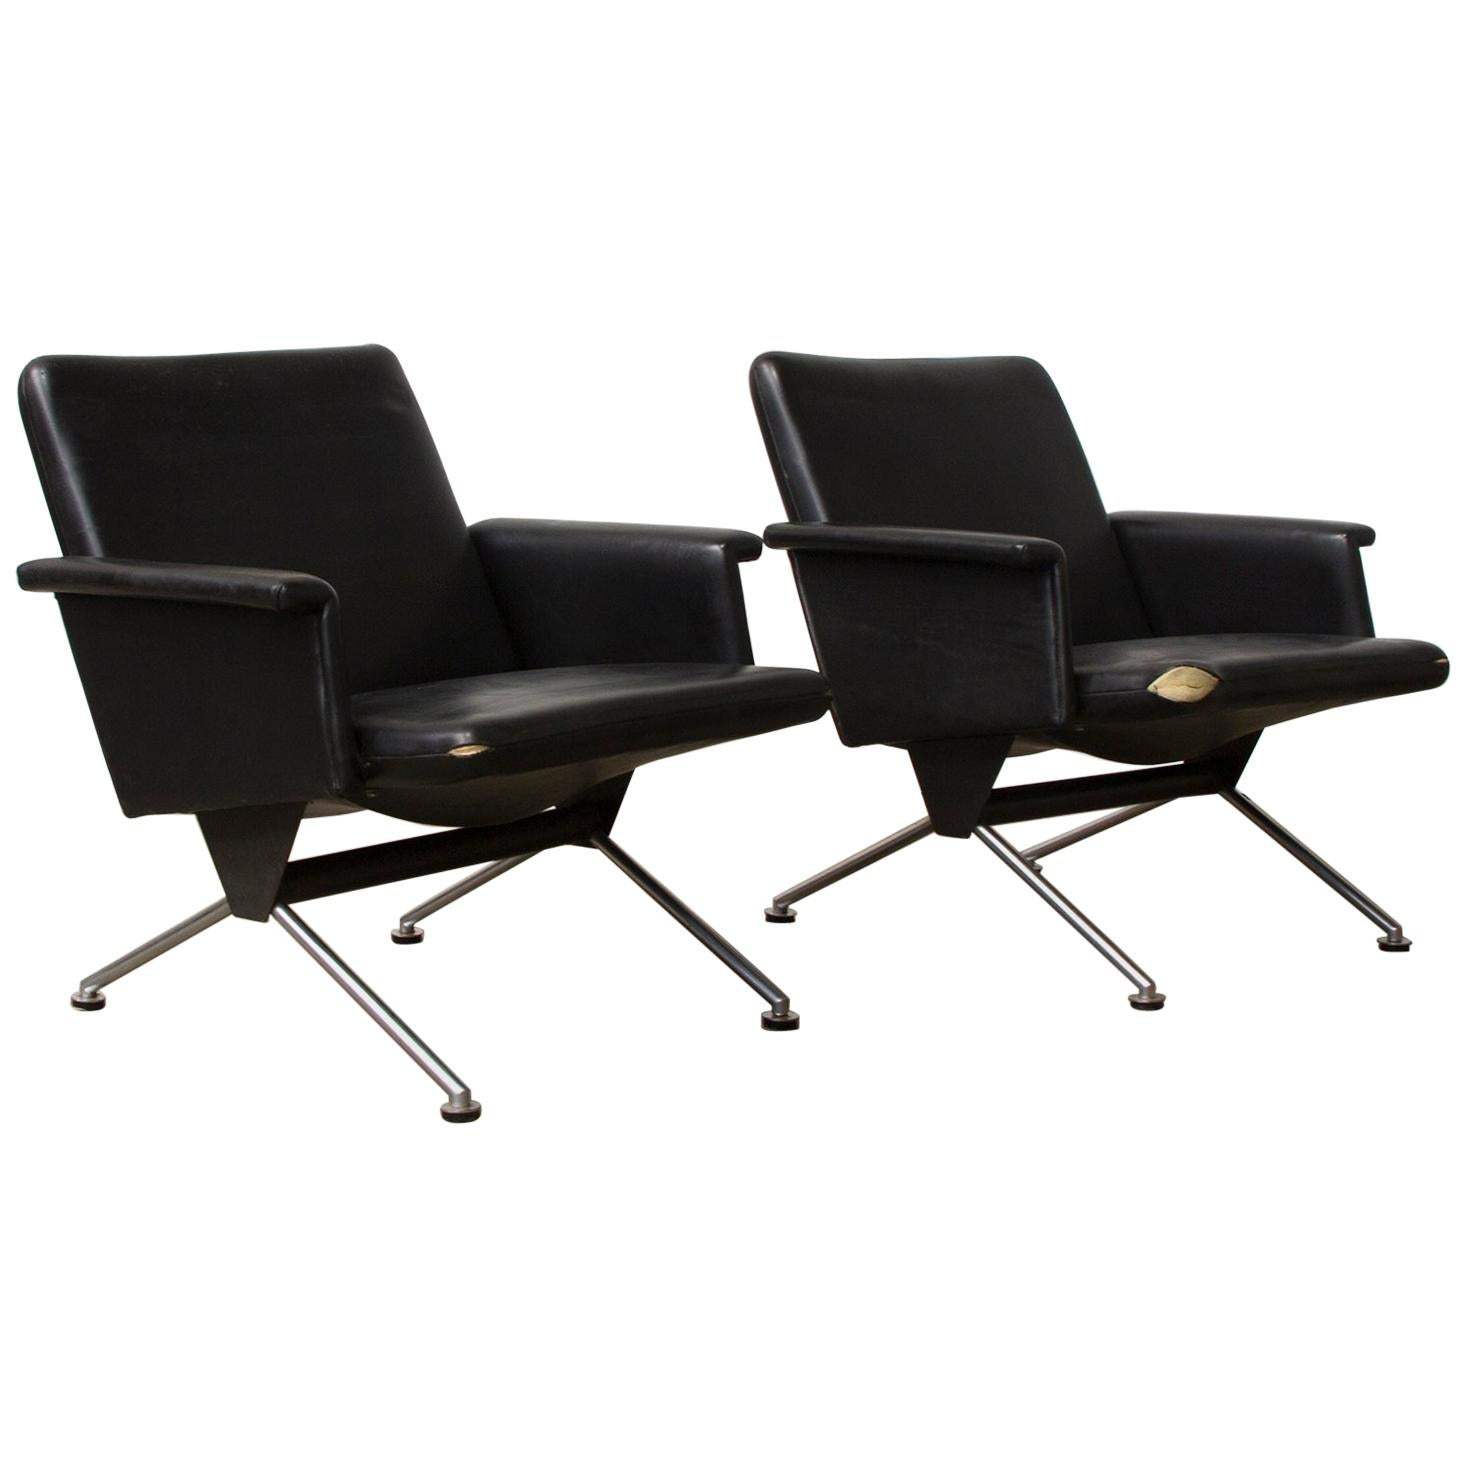 1961, Andre Cordemeyer for Gispen, Set of Two Midcentury Dutch Easy Chairs 1432 For Sale